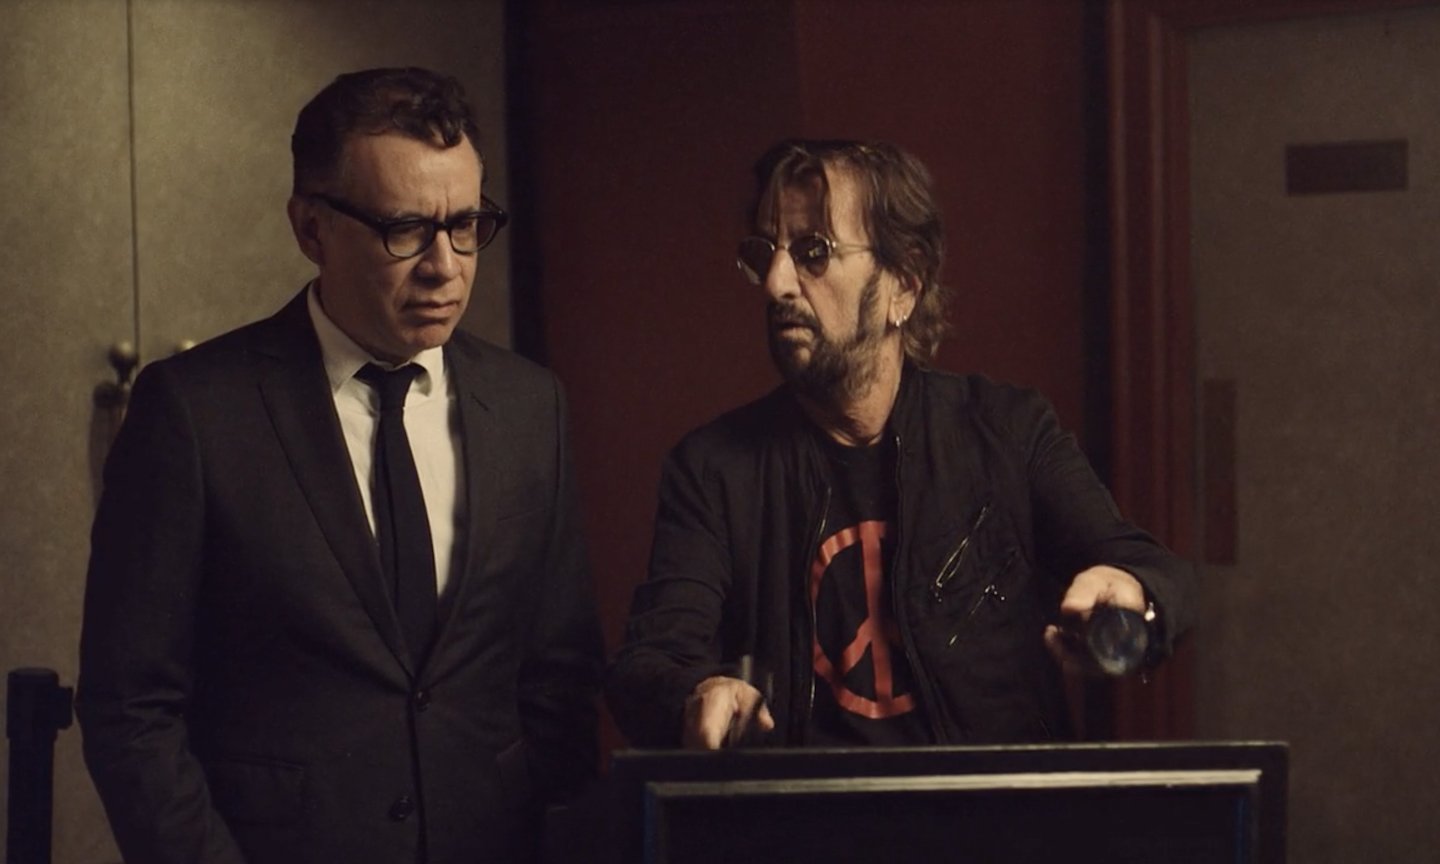 Fred Armisen, Jon Hamm, Ringo Starr, And More Star In Video For George Harrison’s ‘My Sweet Lord’